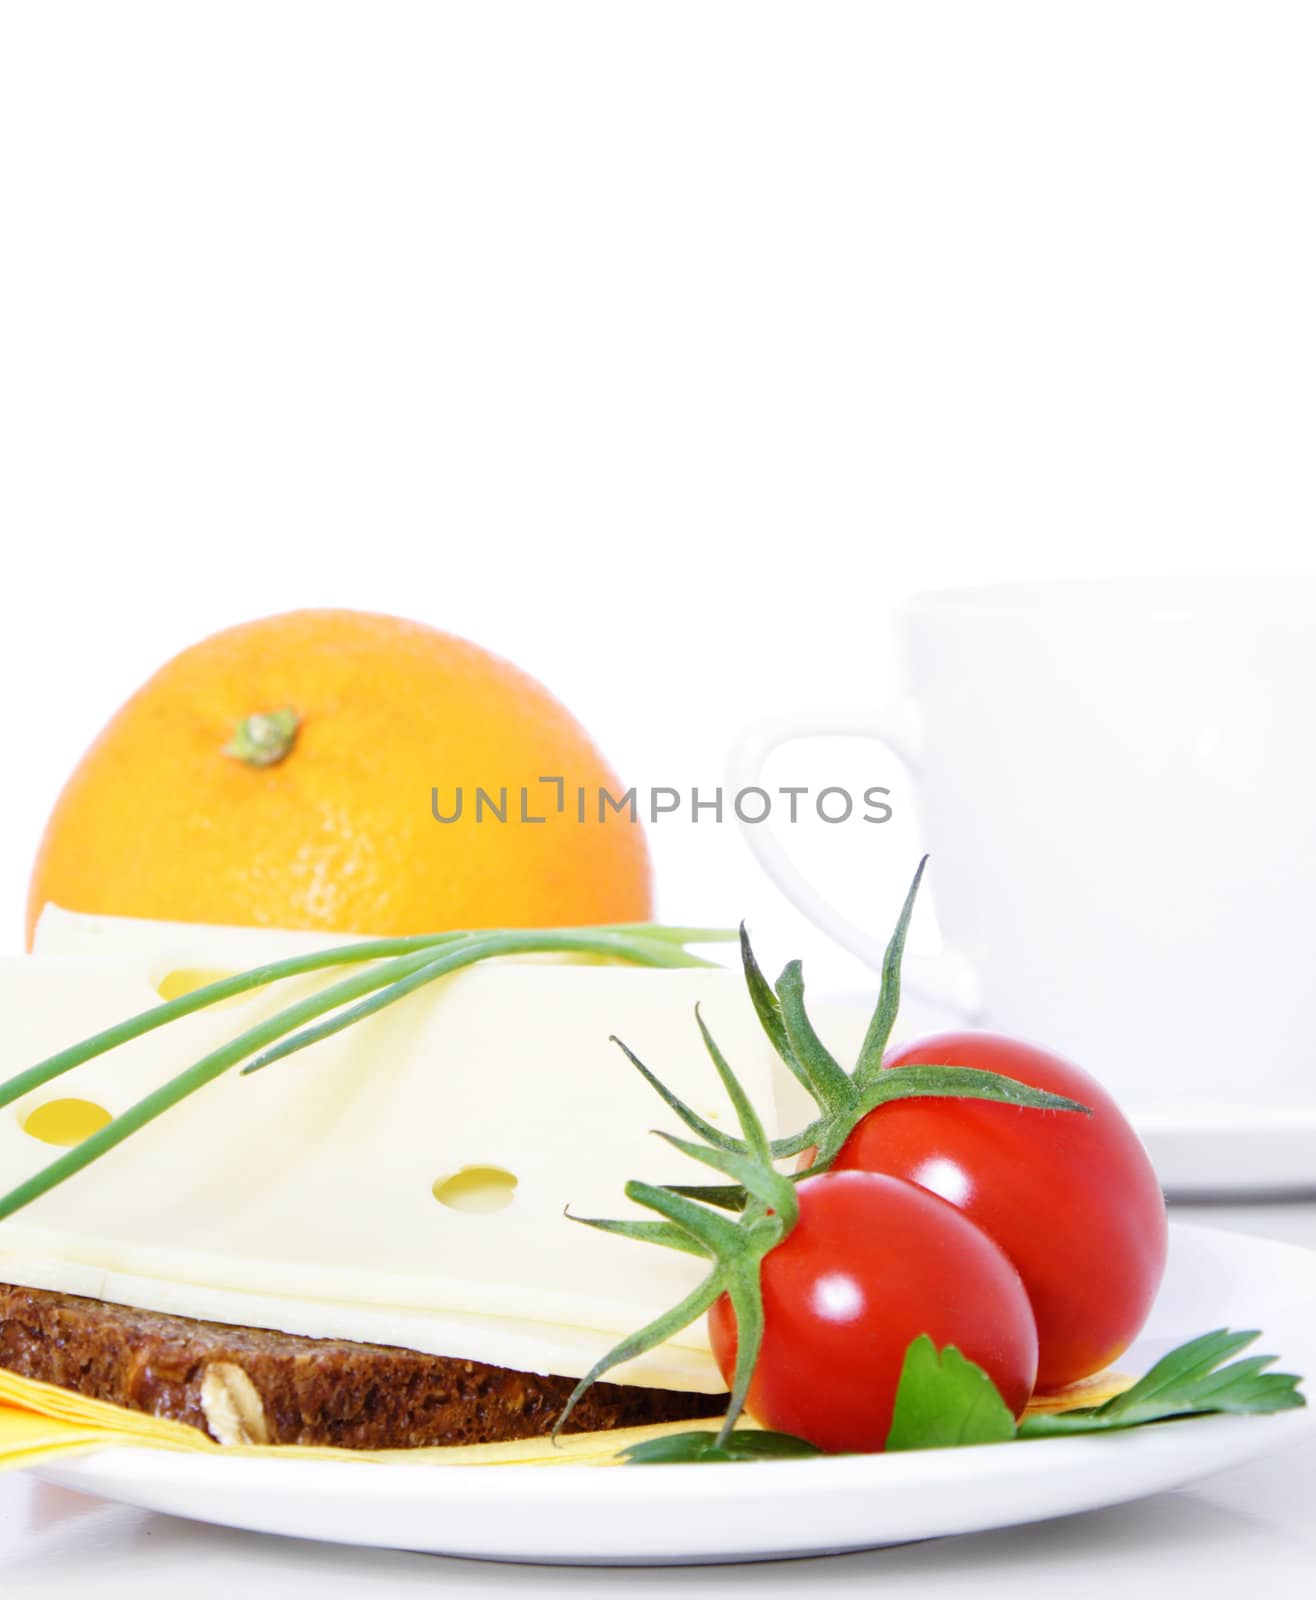 Healthy balanced breakfast. All on white background.